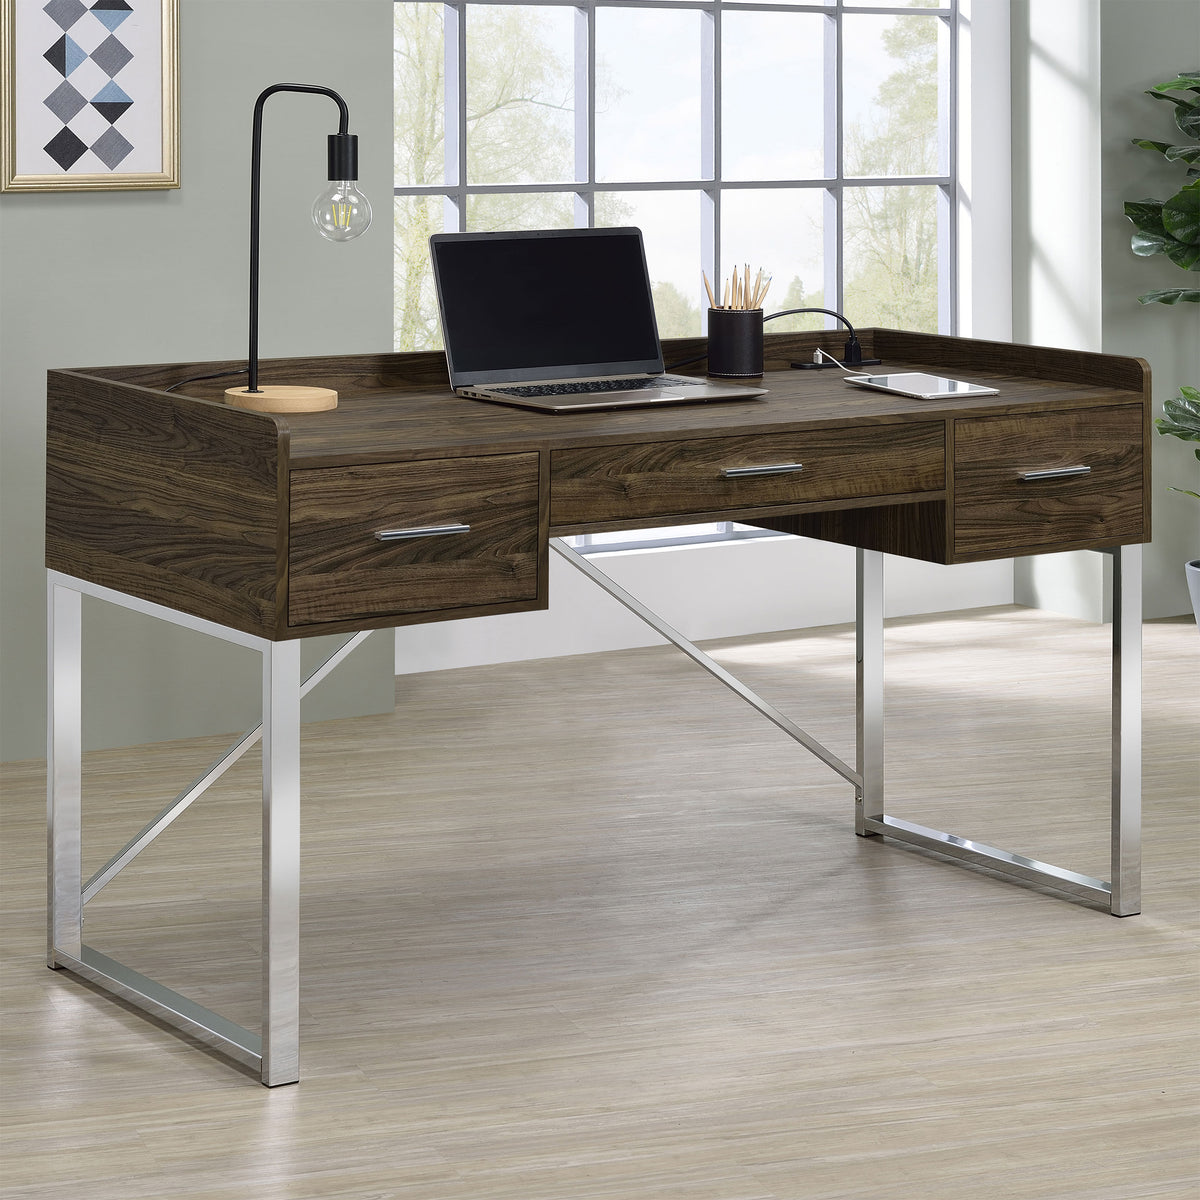 Angelica 3-drawer Writing Desk Walnut and Chrome  Las Vegas Furniture Stores